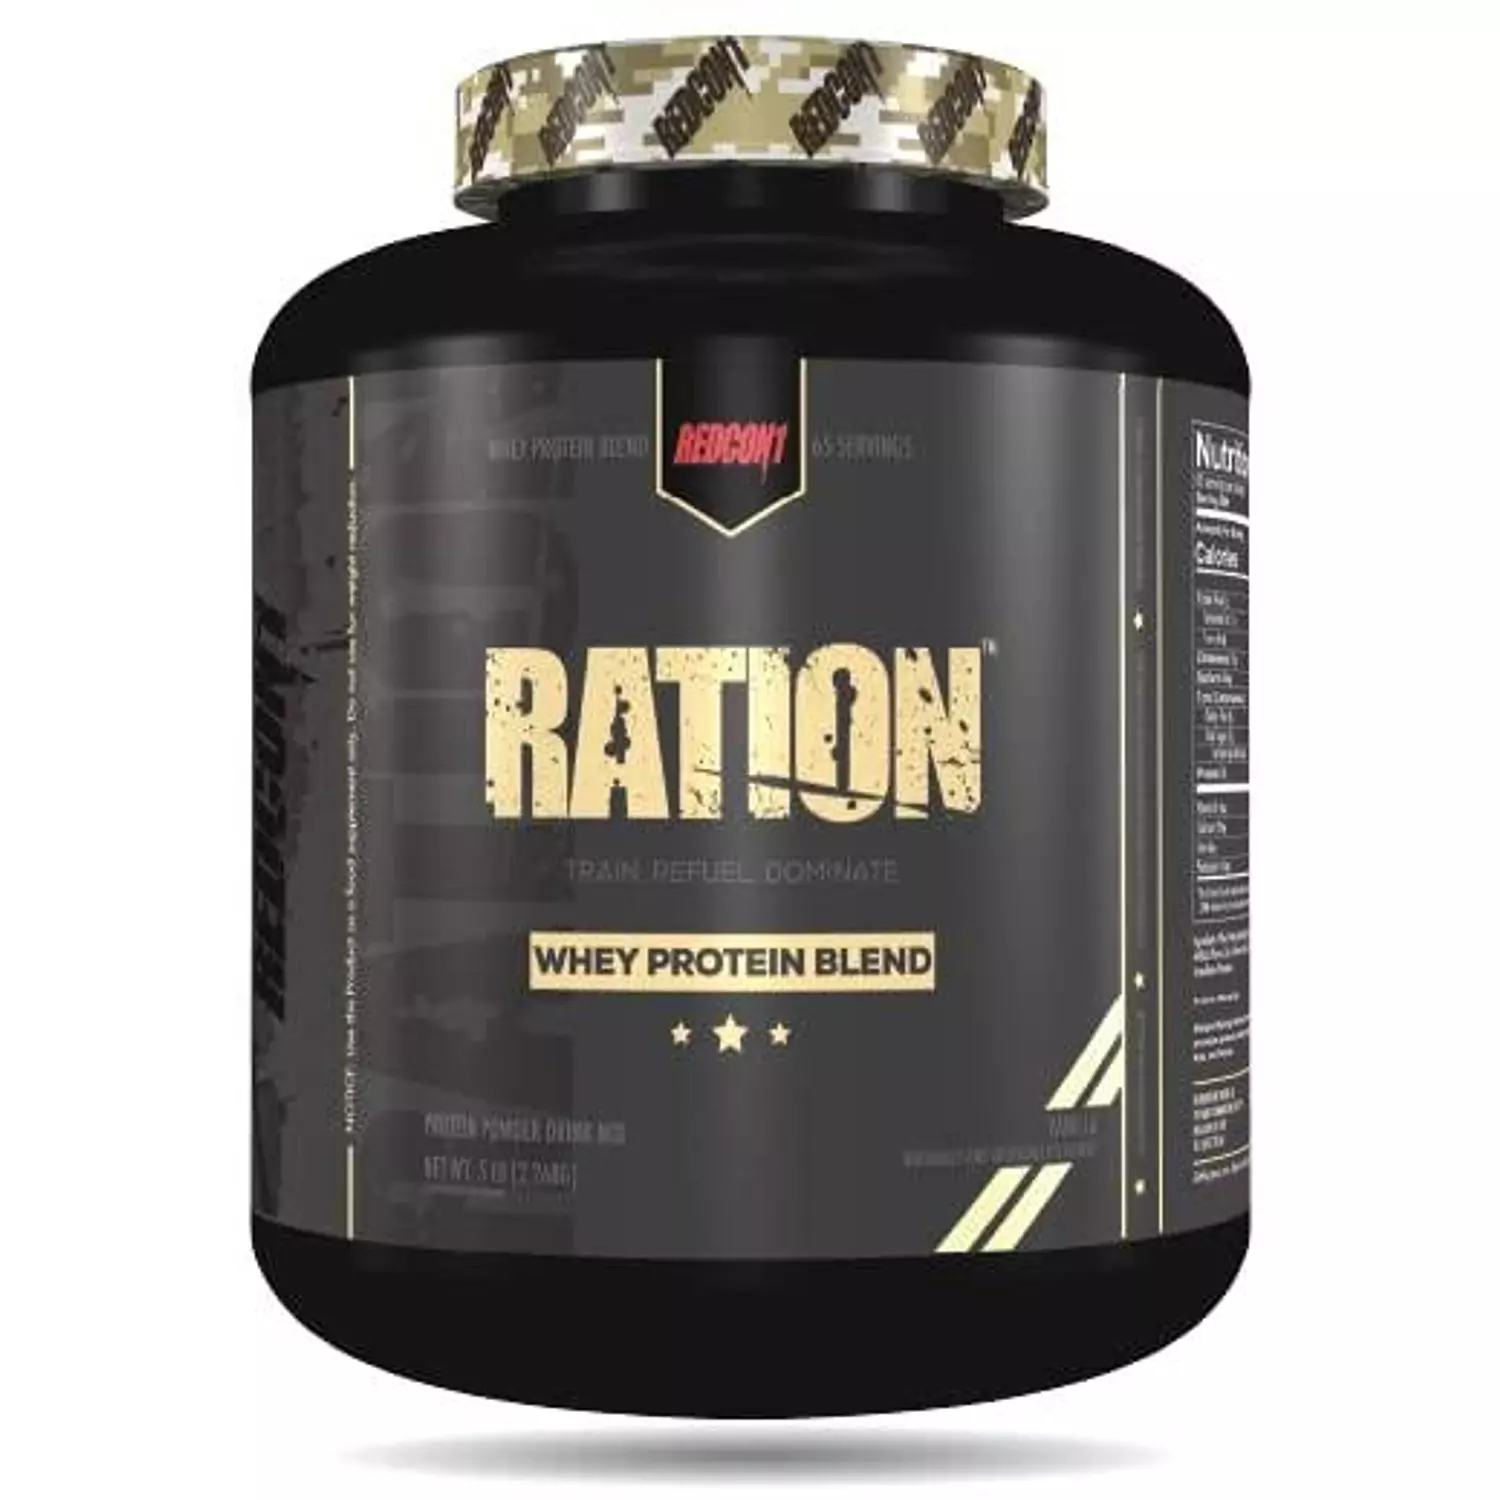 Ration Redcon1 hover image